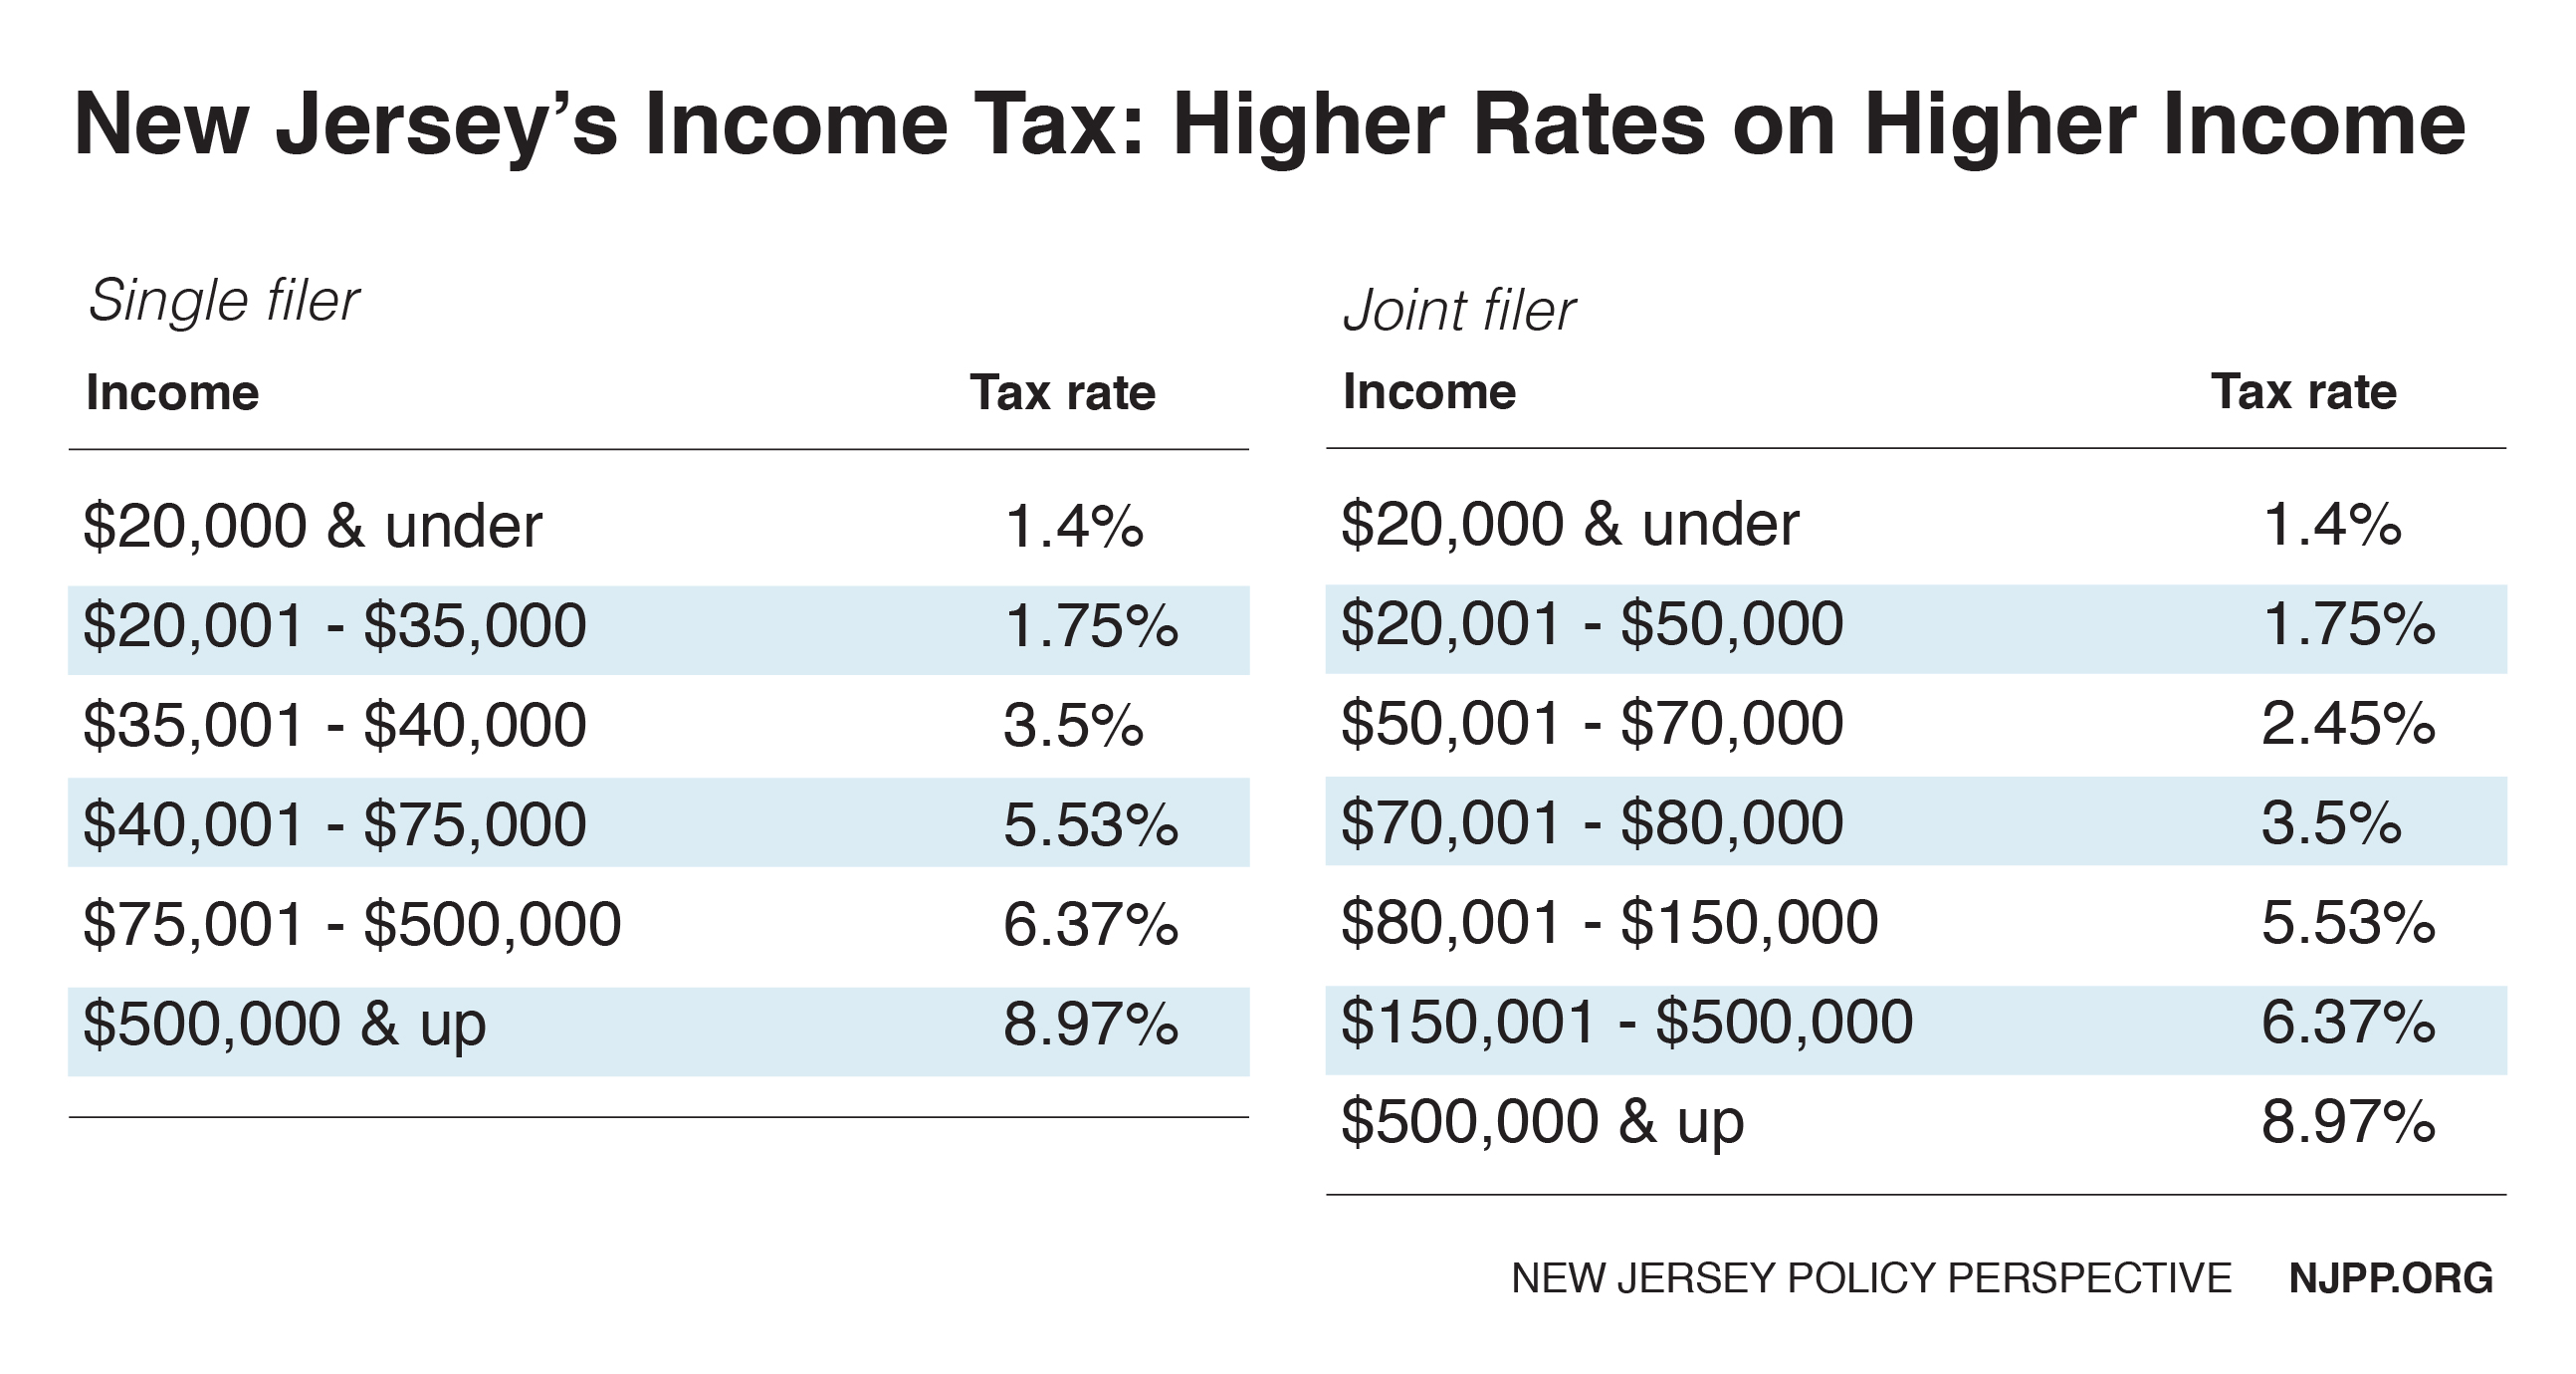 Reforming New Jersey s Income Tax Would Help Build Shared Prosperity 